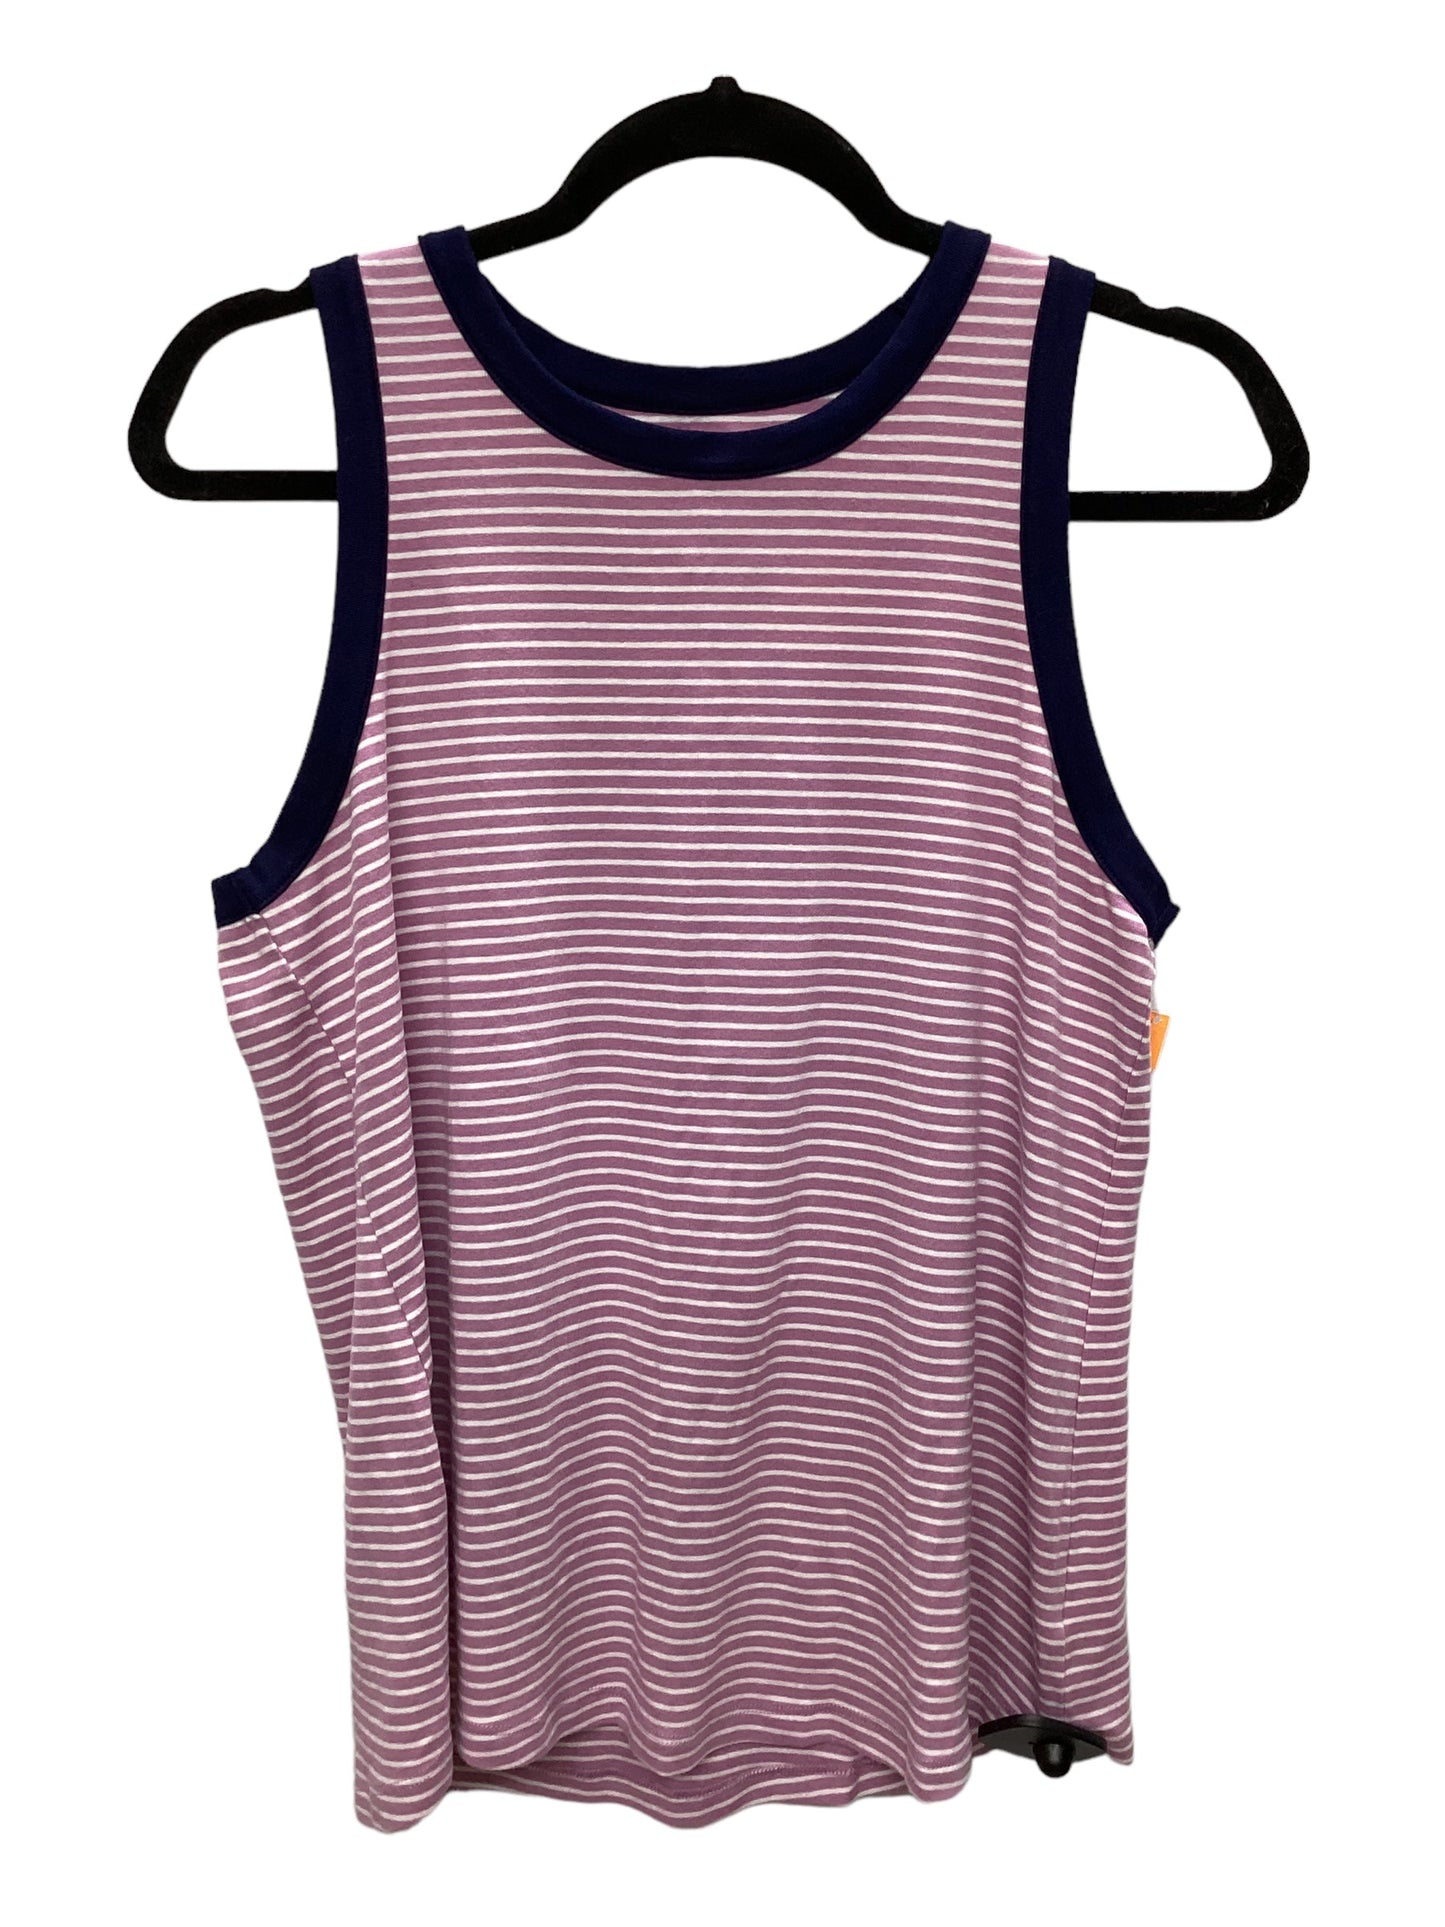 Tank Top By Old Navy  Size: L